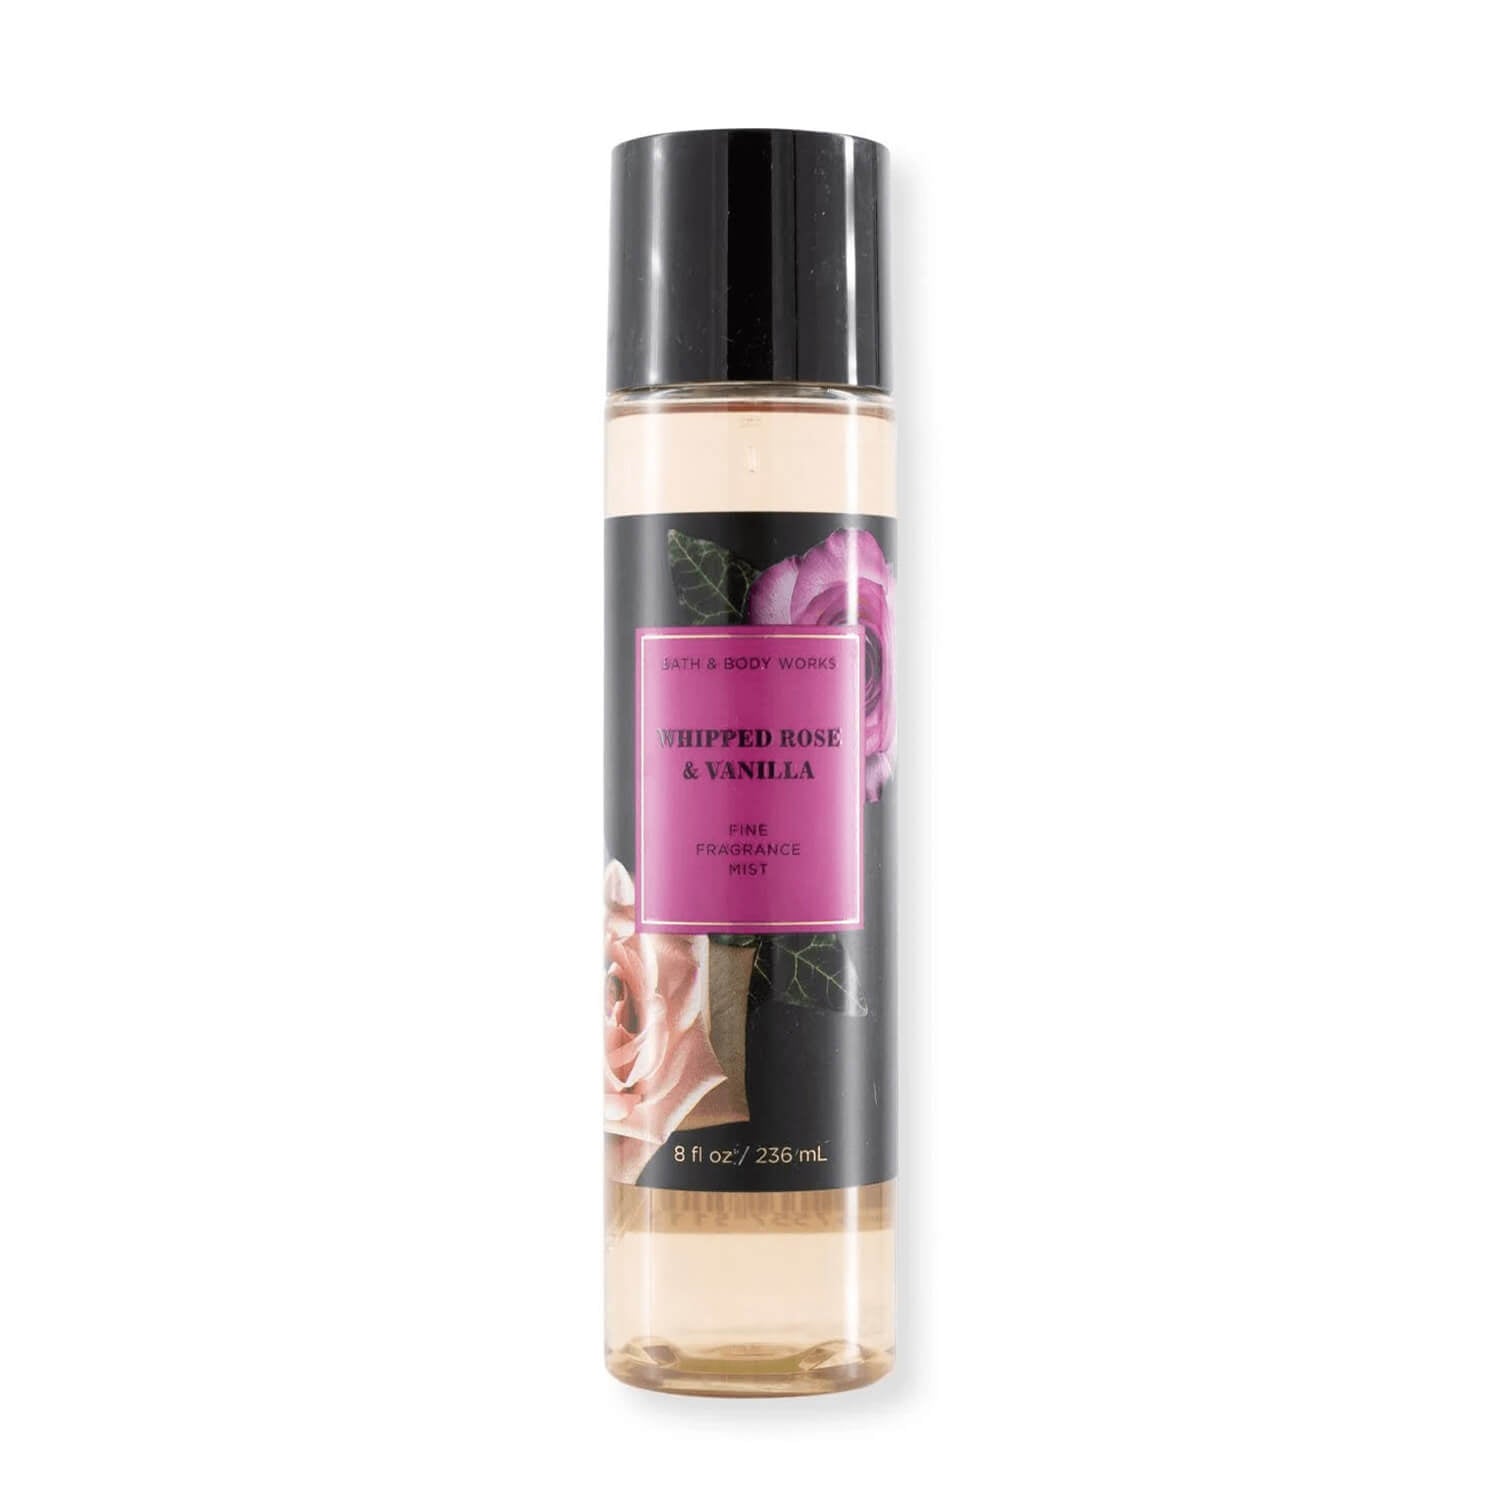 shop bath and body works fragrance mist in whipped rose vanilla available at Heygirl.pk for delivery in Pakistan